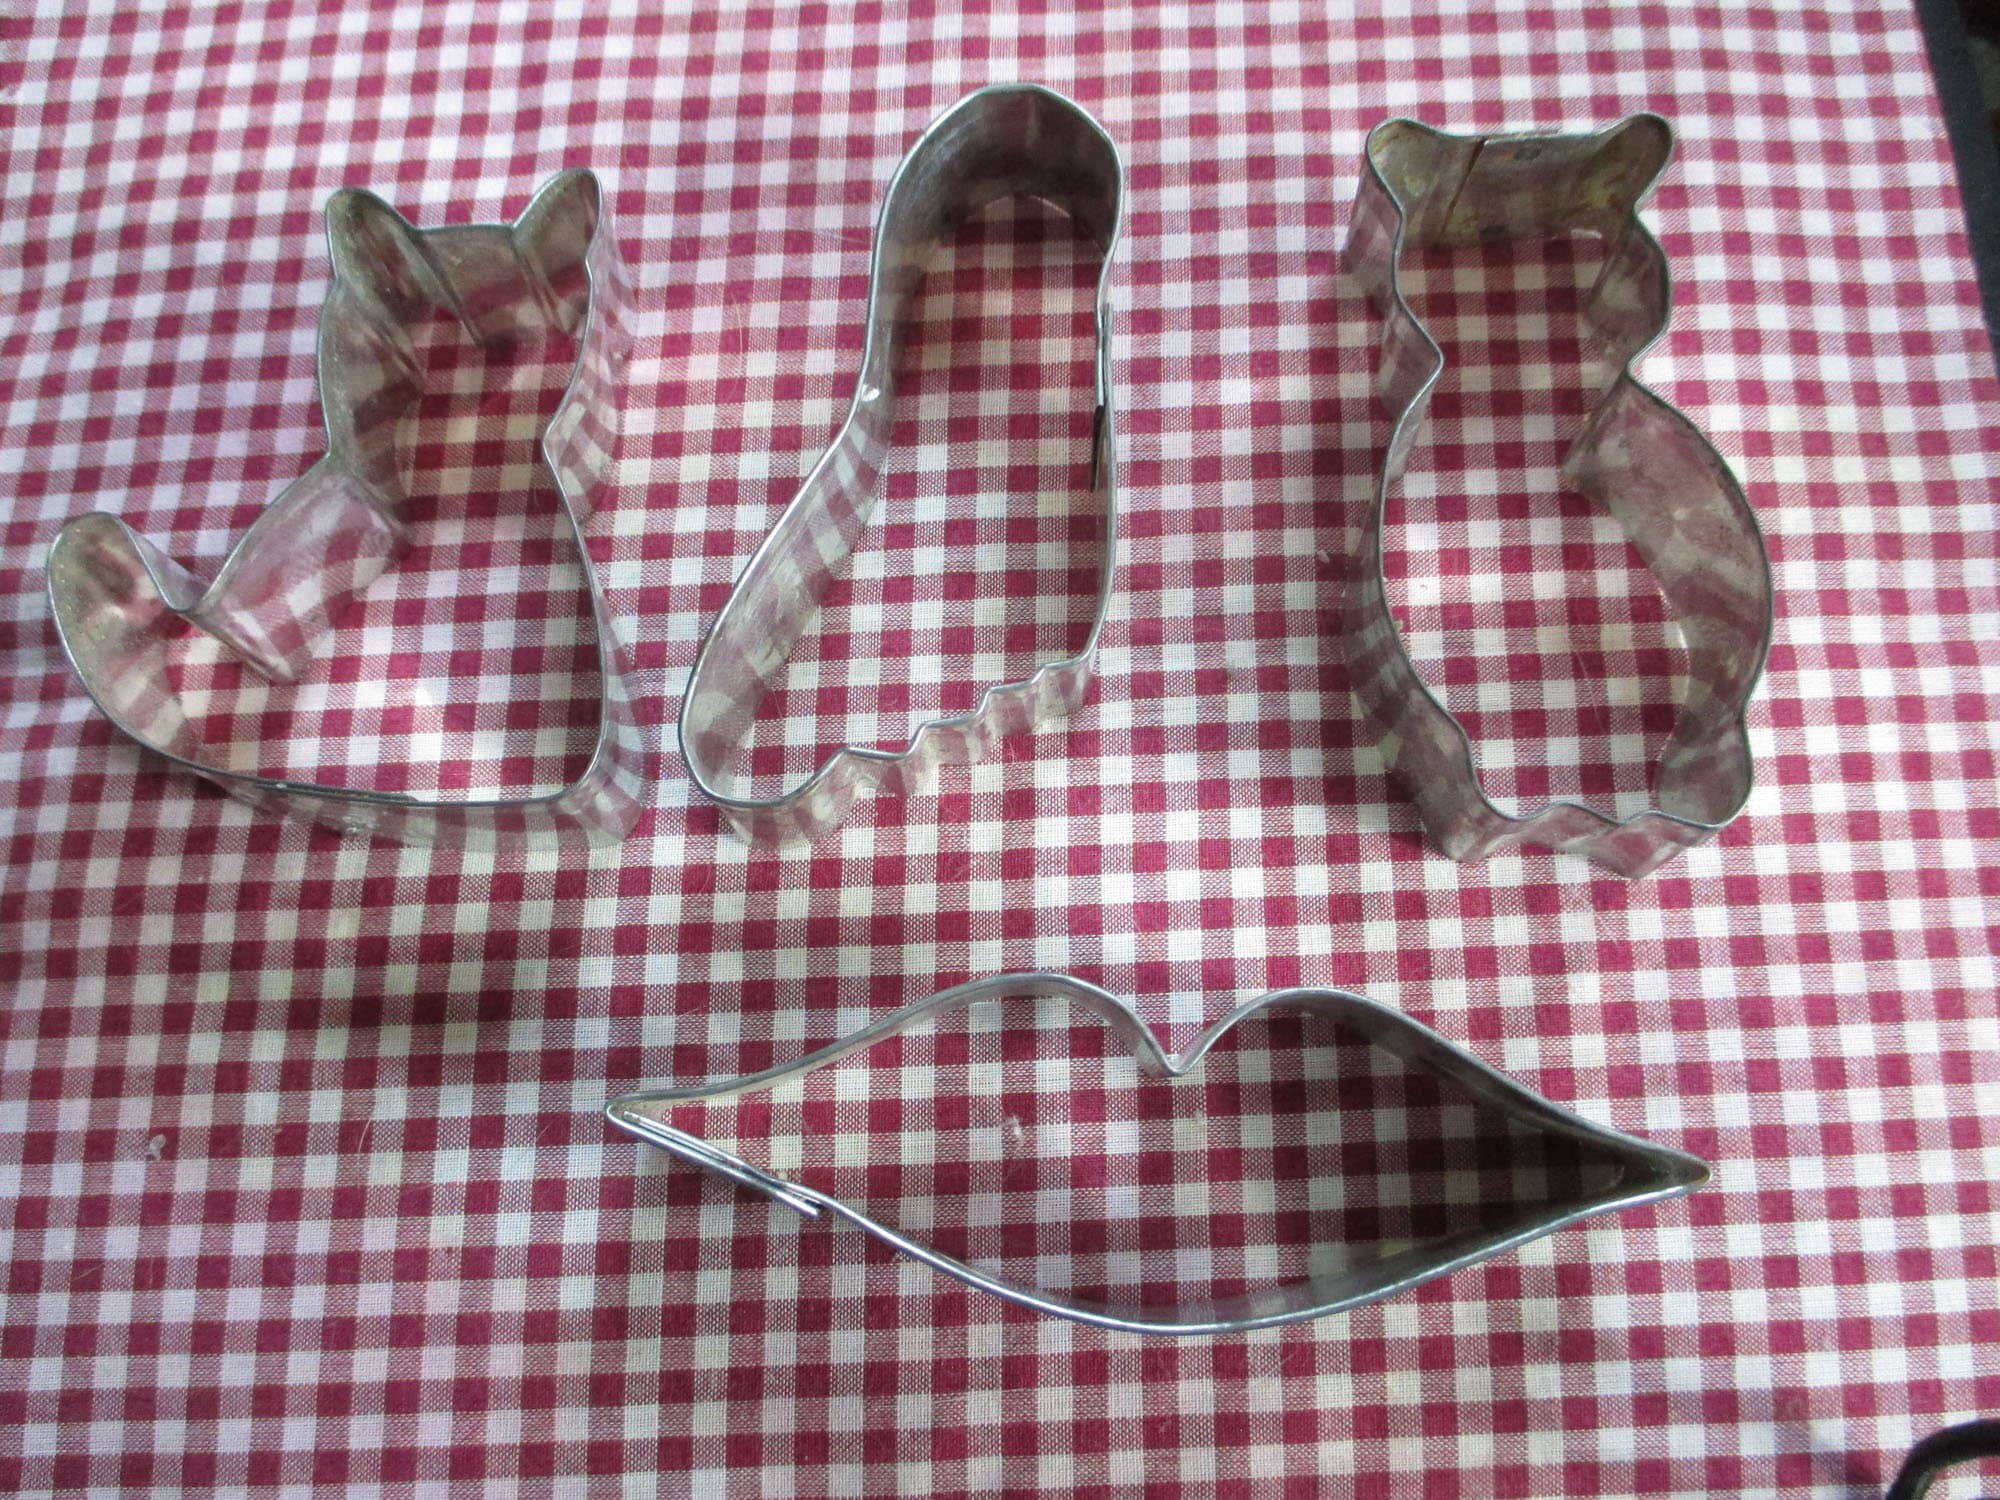 Vintage Tin/Metal Lot Of 4 Cookie Cutters - Cat, Owl, Foot & Lips One Hundreds From Cookie Cutter Estate Estate Find